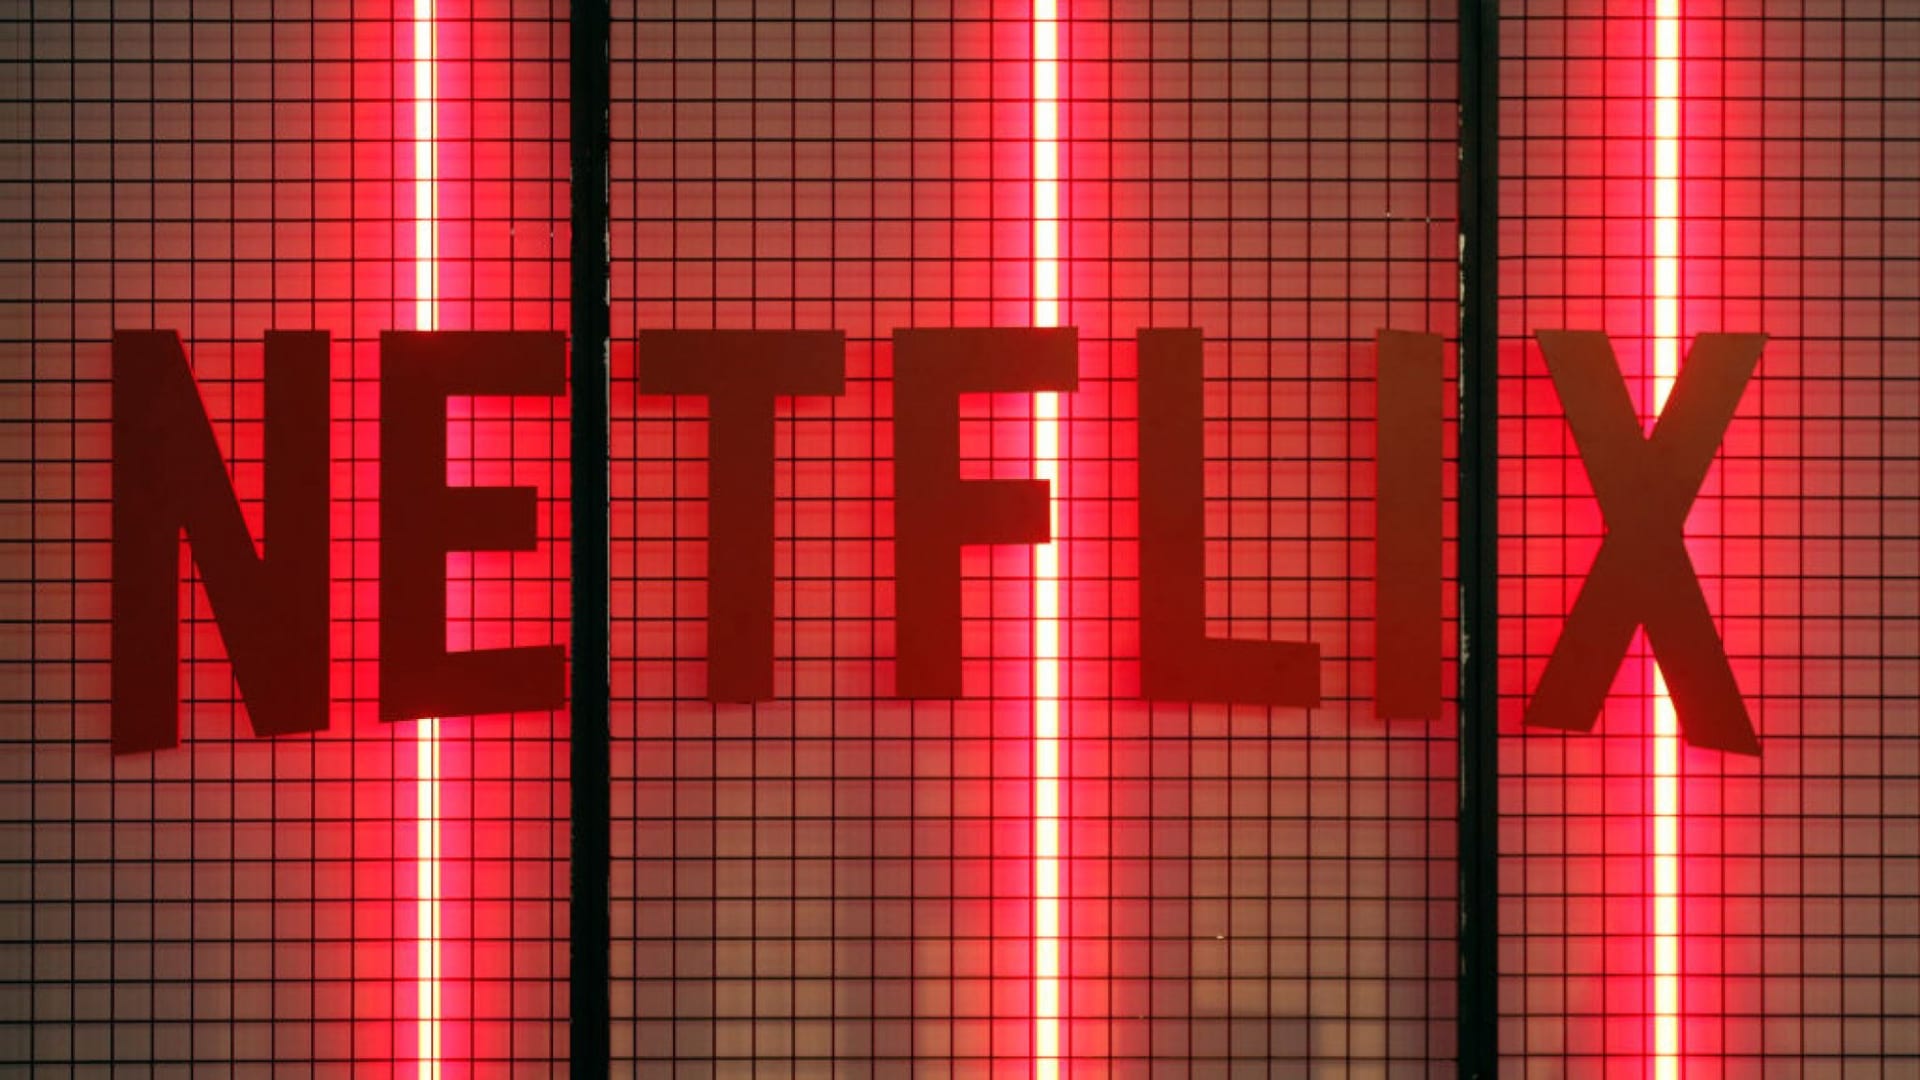 There's No One Left to Sign Up for Netflix, So It's Raising Prices Again Instead